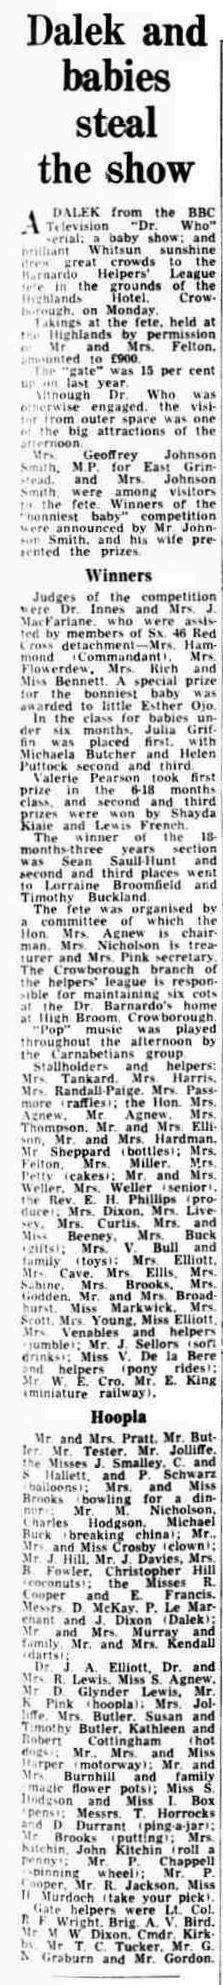 1966-06-03 Kent and Sussex Courier.jpg